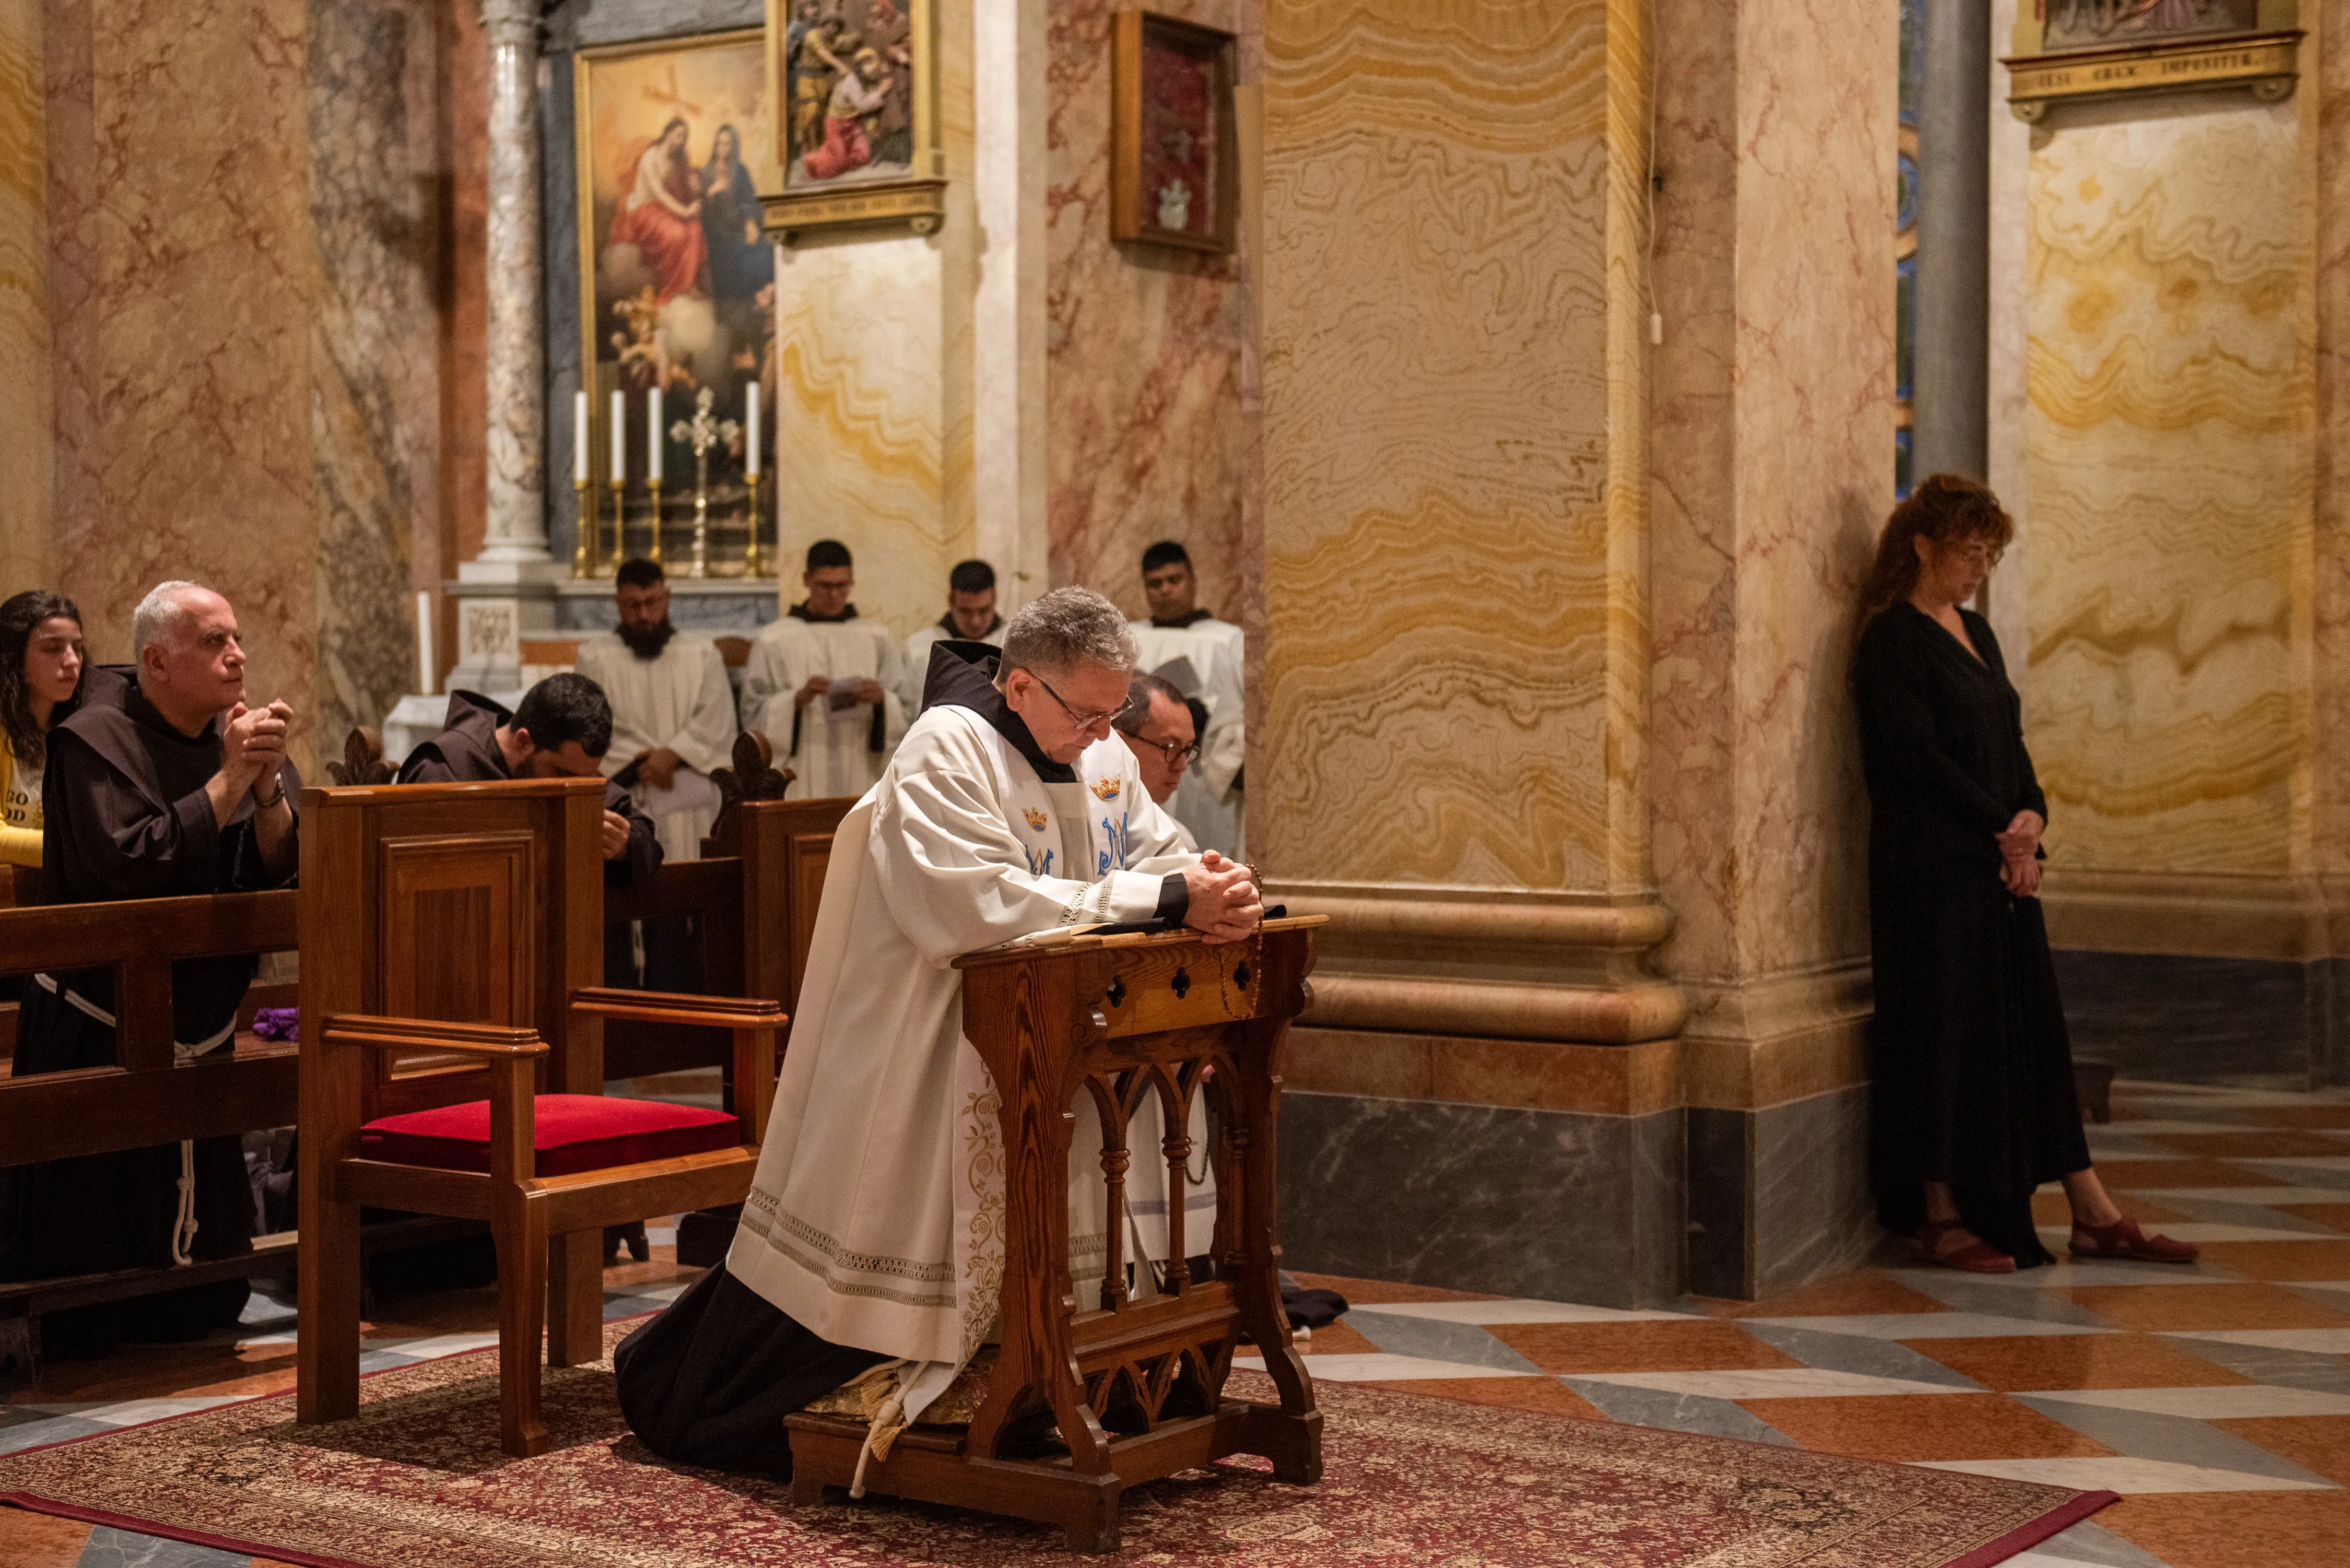 The Franciscan friars of the Custody of the Holy Land promoted a special "Rosary for peace" in St. Saviour's Church in Jerusalem, on Saturday, Oct.14. The prayer was presided over by the Custos of the Holy Land, Father Francesco Patton. Credit: Marinella Bandini